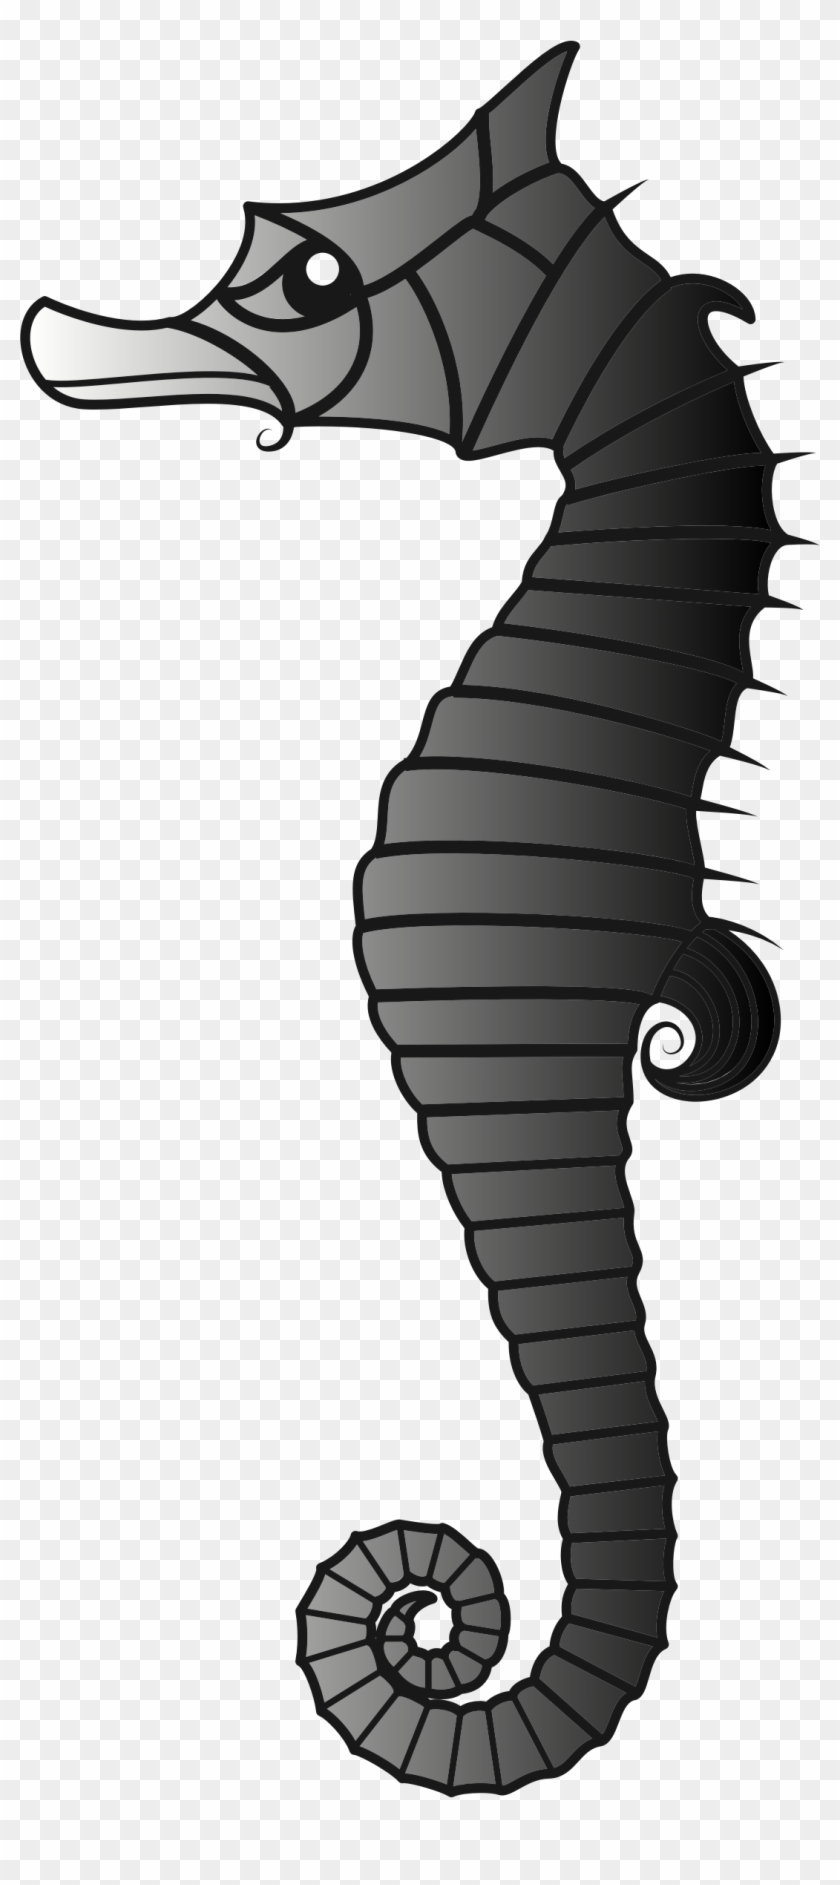 Ray Clipart Seahorse - Illustration - Png Download #405413